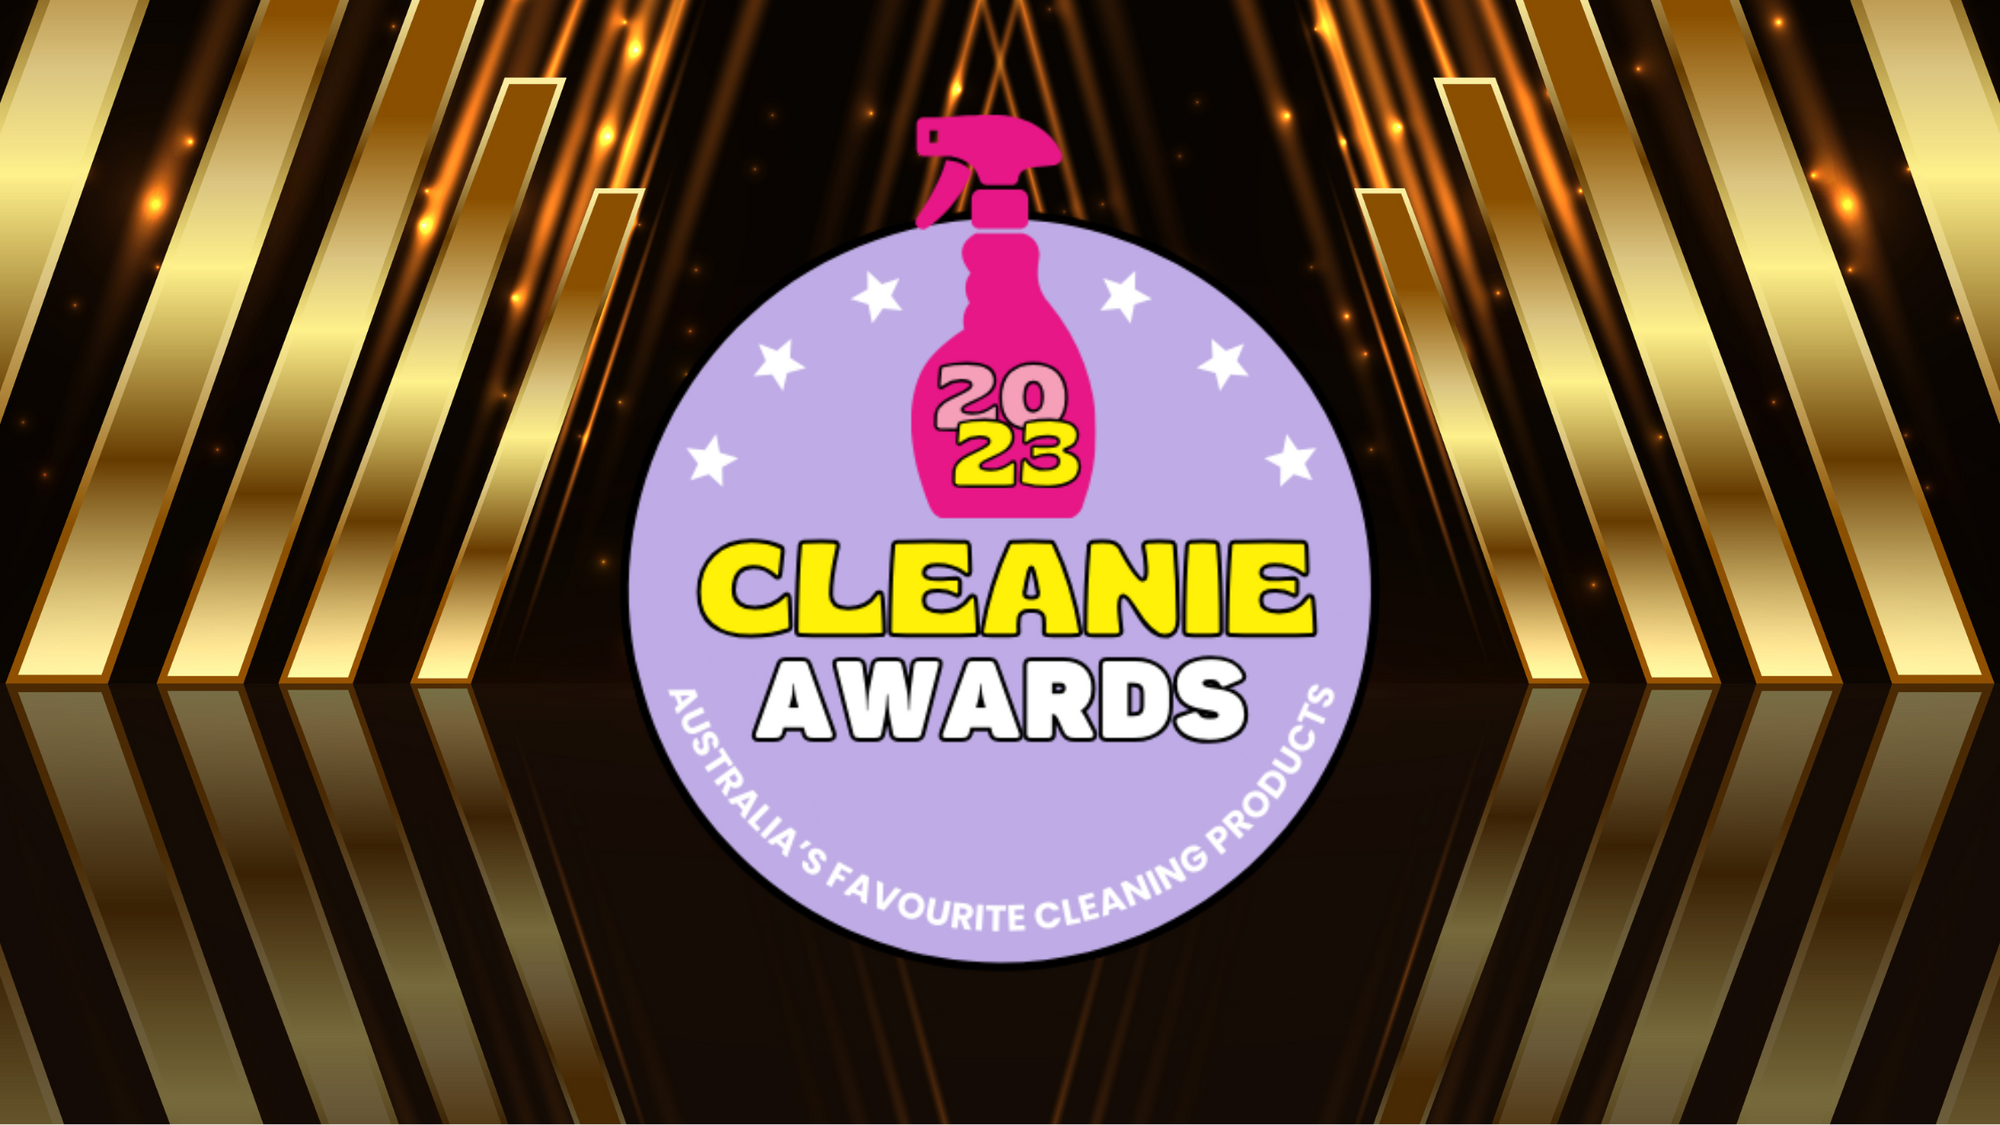 Celebrating Innovation: Welcome to the 2023 Cleanie Awards